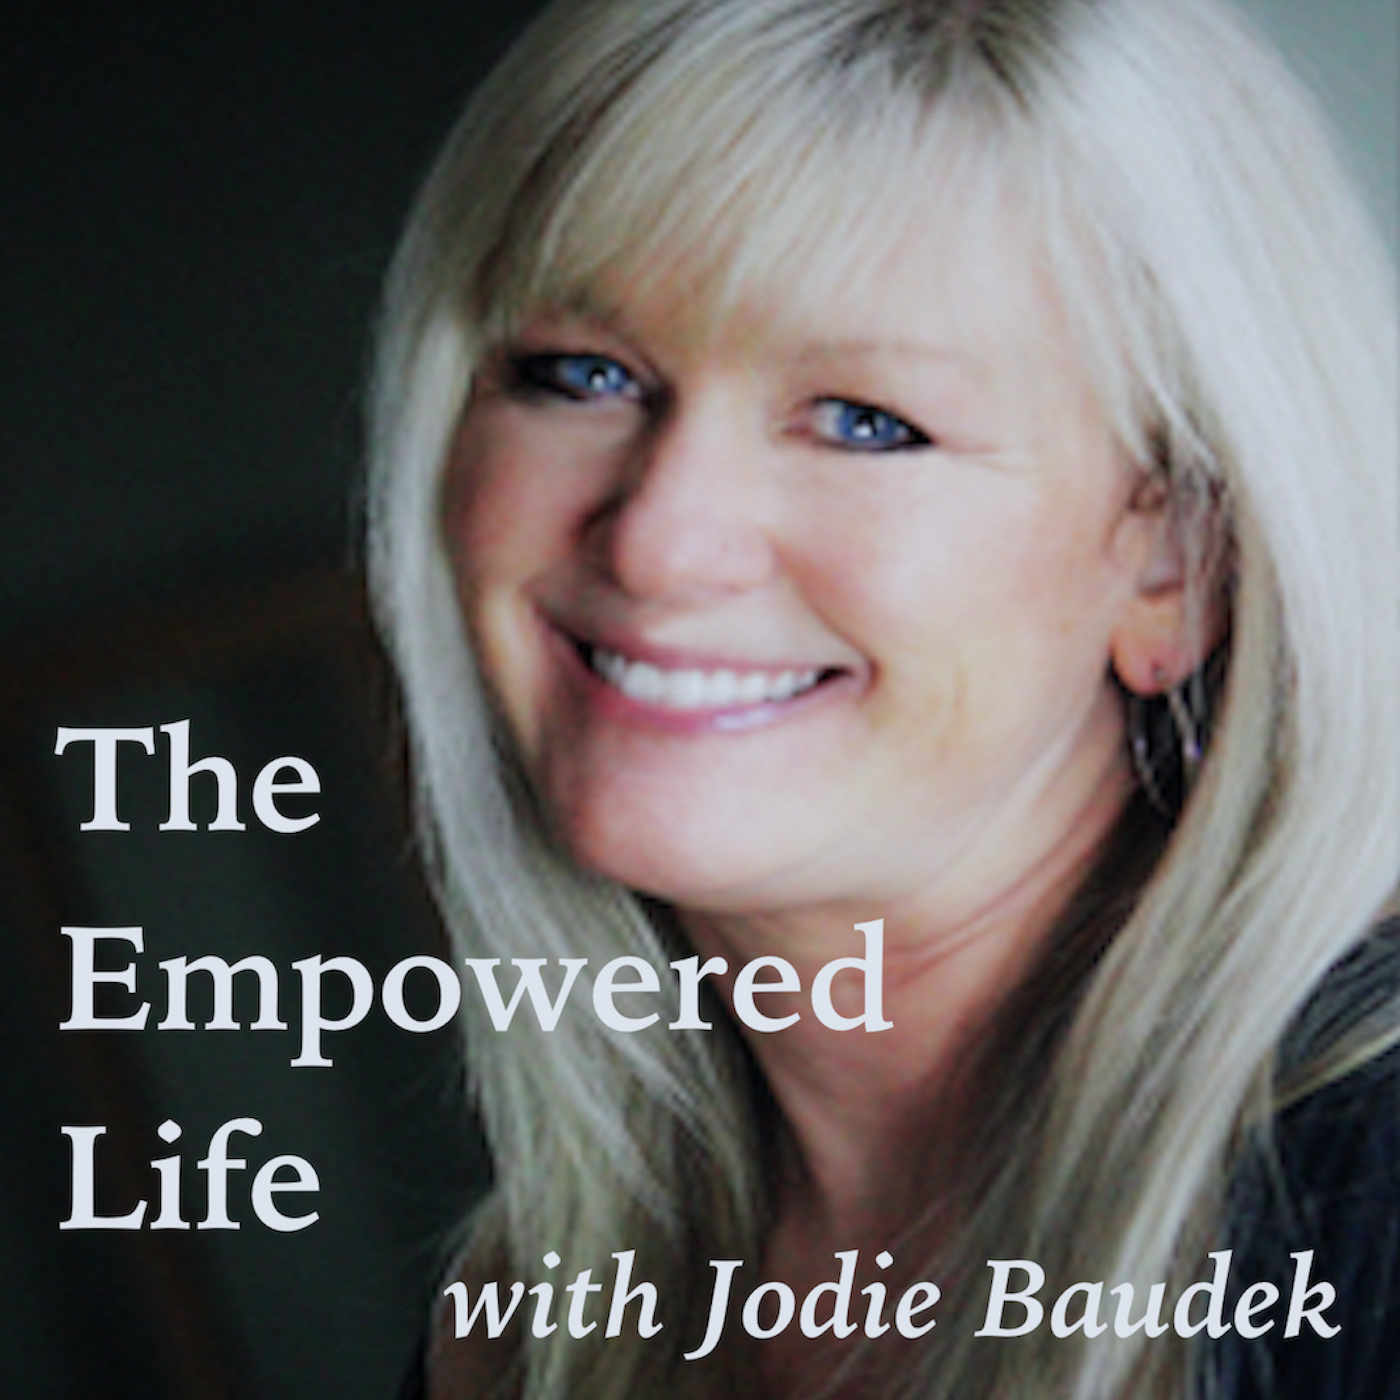 The Empowered Life with Jodie Baudek